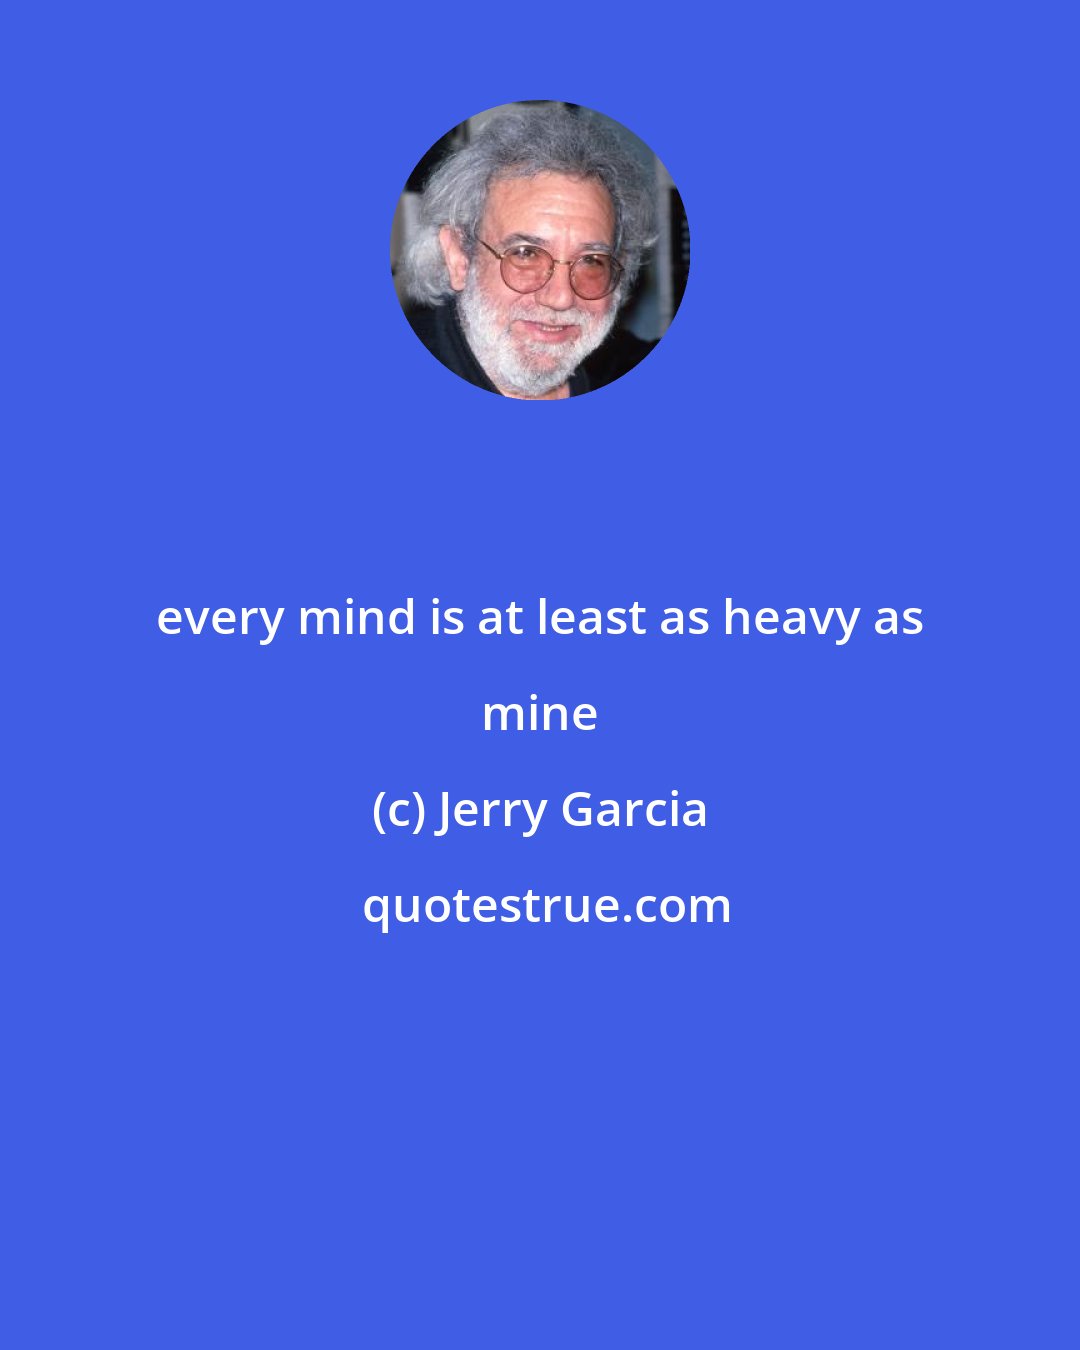 Jerry Garcia: every mind is at least as heavy as mine